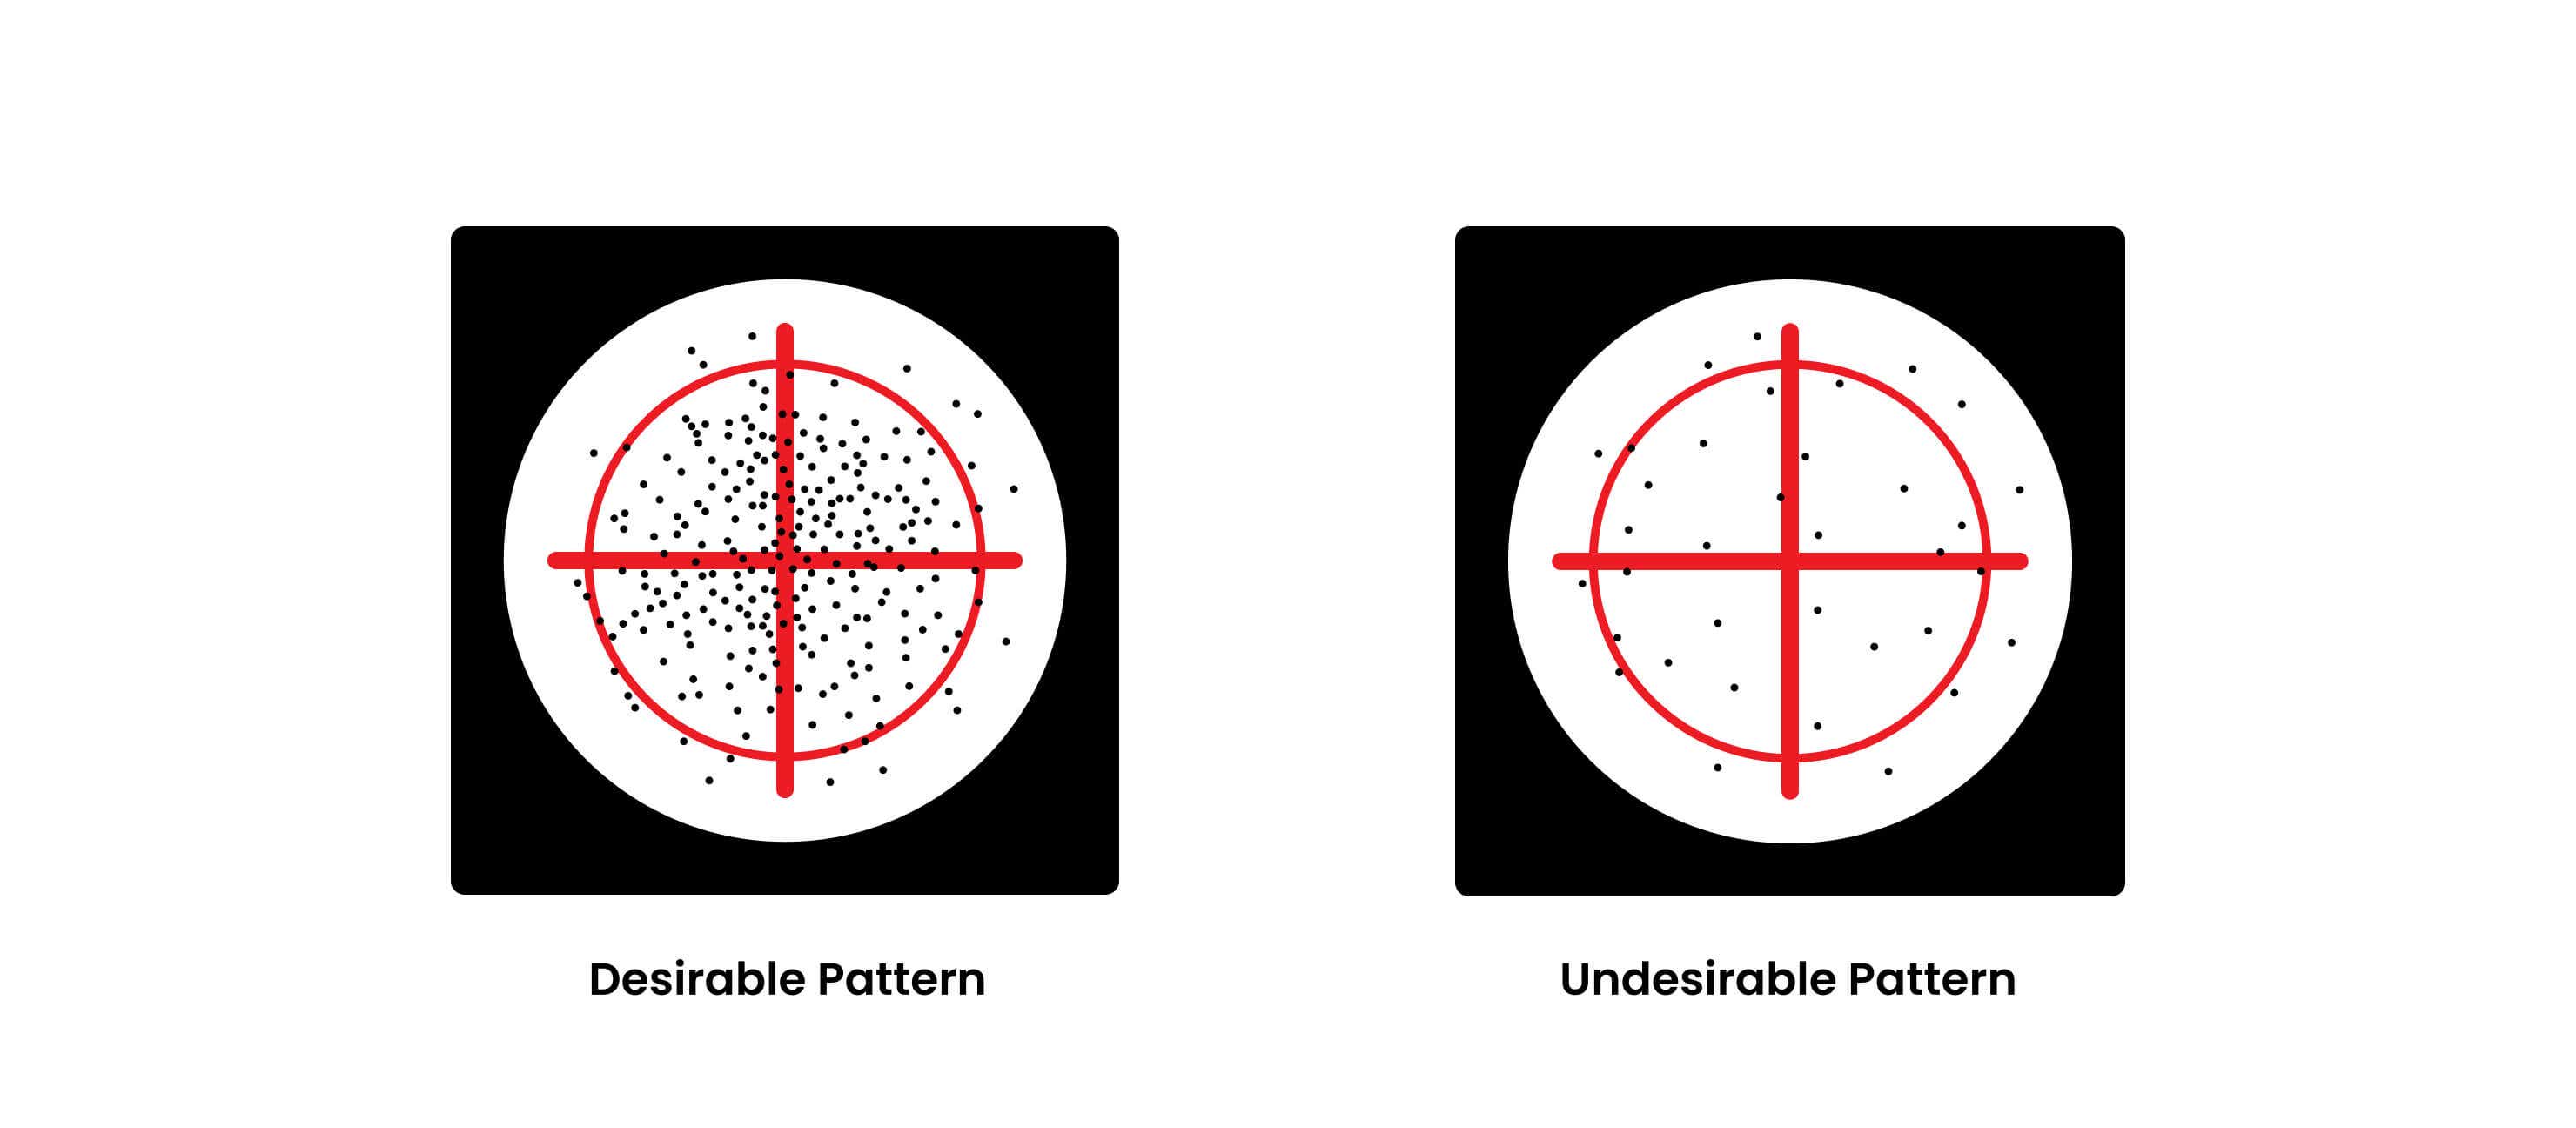 A depiction of the ideal patterning results for shotgun chokes